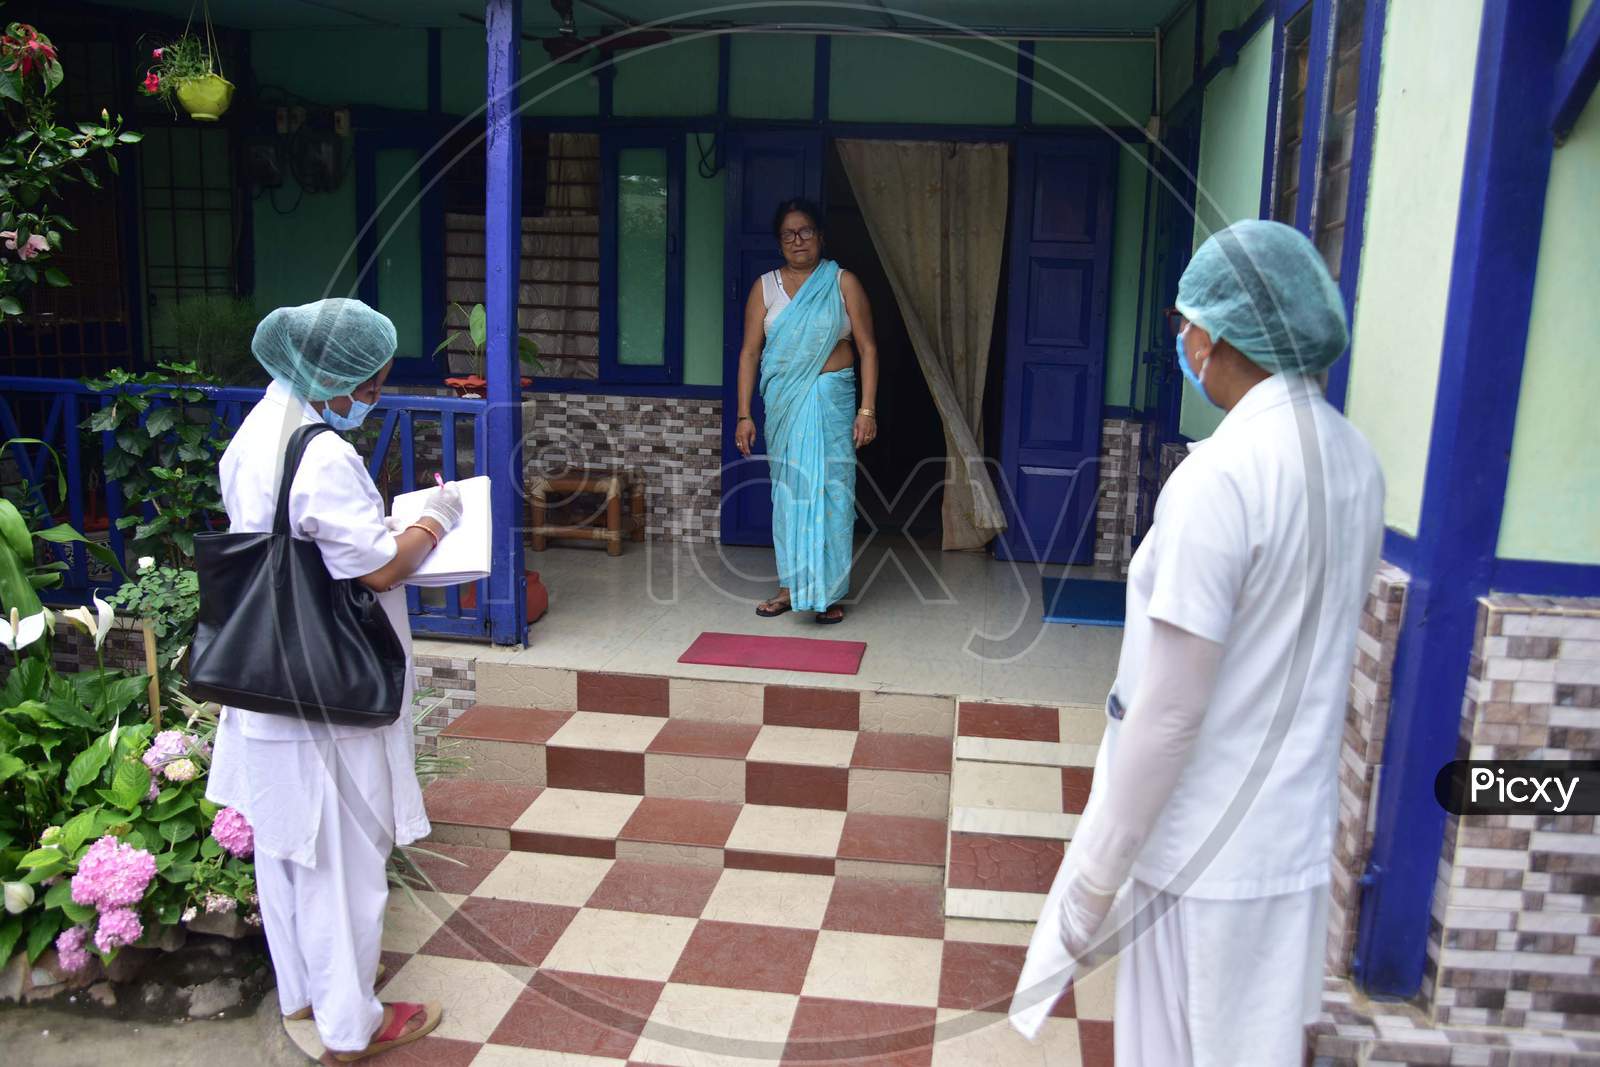 Health Workers  Conducting  House To House Health Survey  During Nationwide Lockdown Amidst Coronavirus or COVID-19 Pandemic  In Nagaon District Of Assam,India